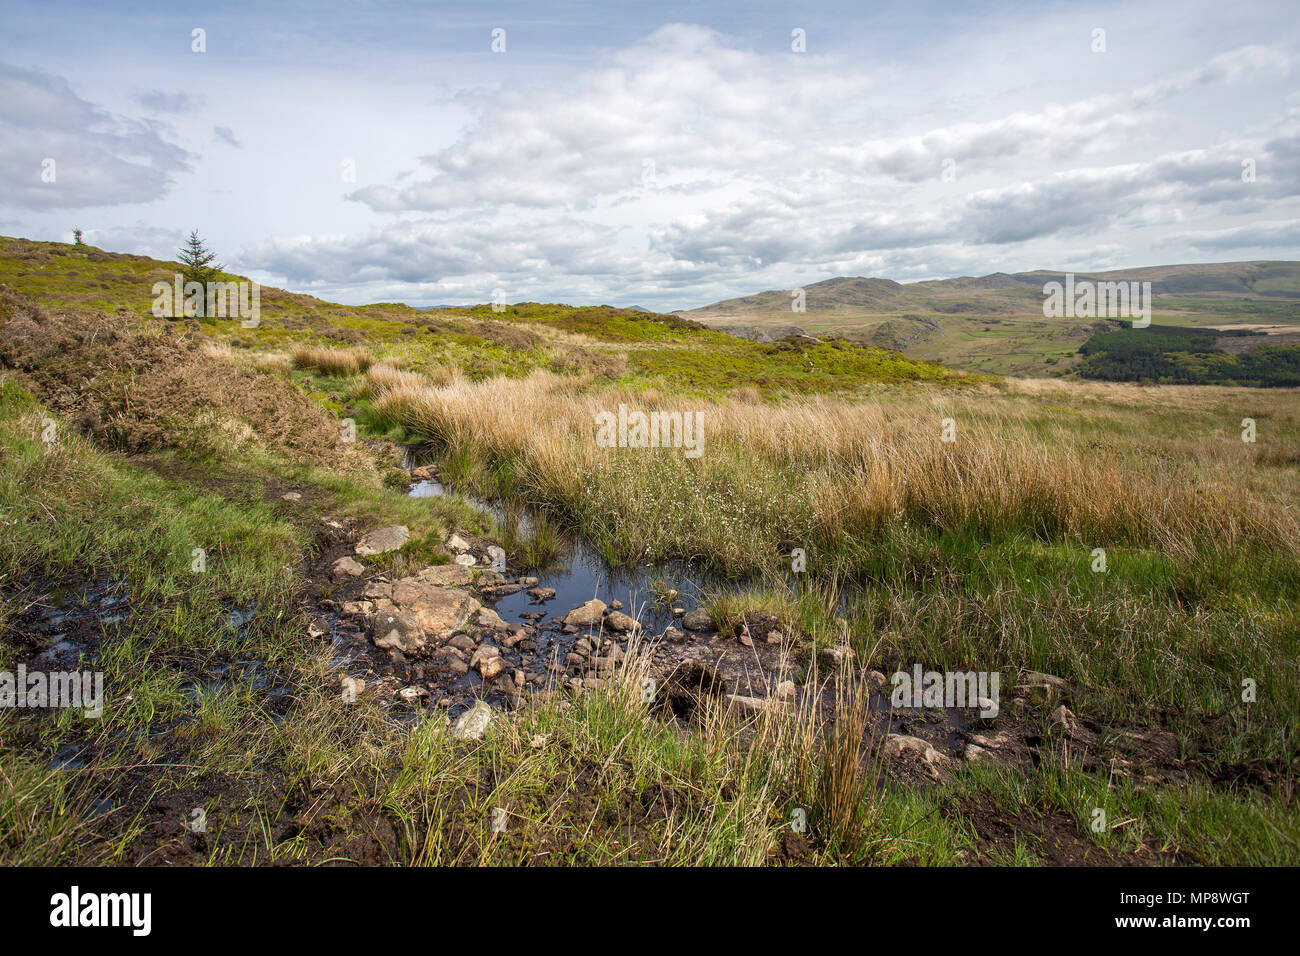 A small body of water in marshland in The Lake District with a view of hills in the background. Stock Photo